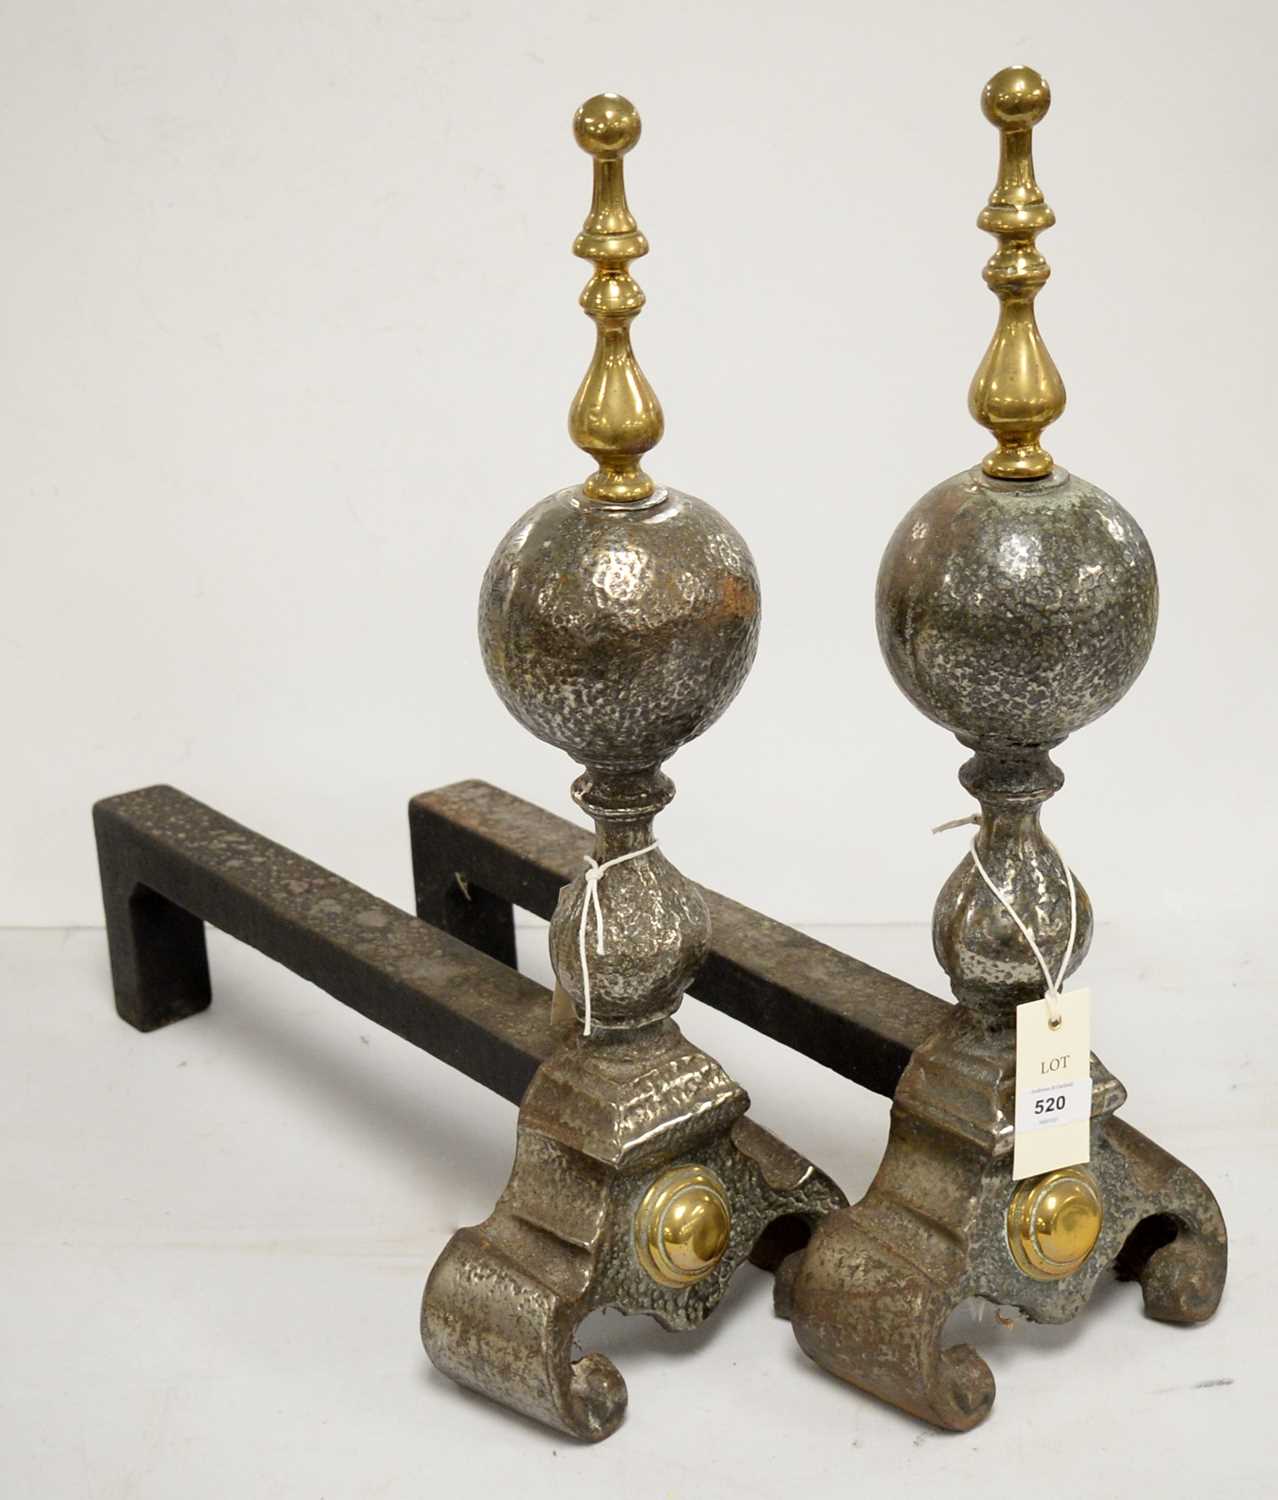 Lot 520 - Pair of late 18th/early 19th Century fire andirons